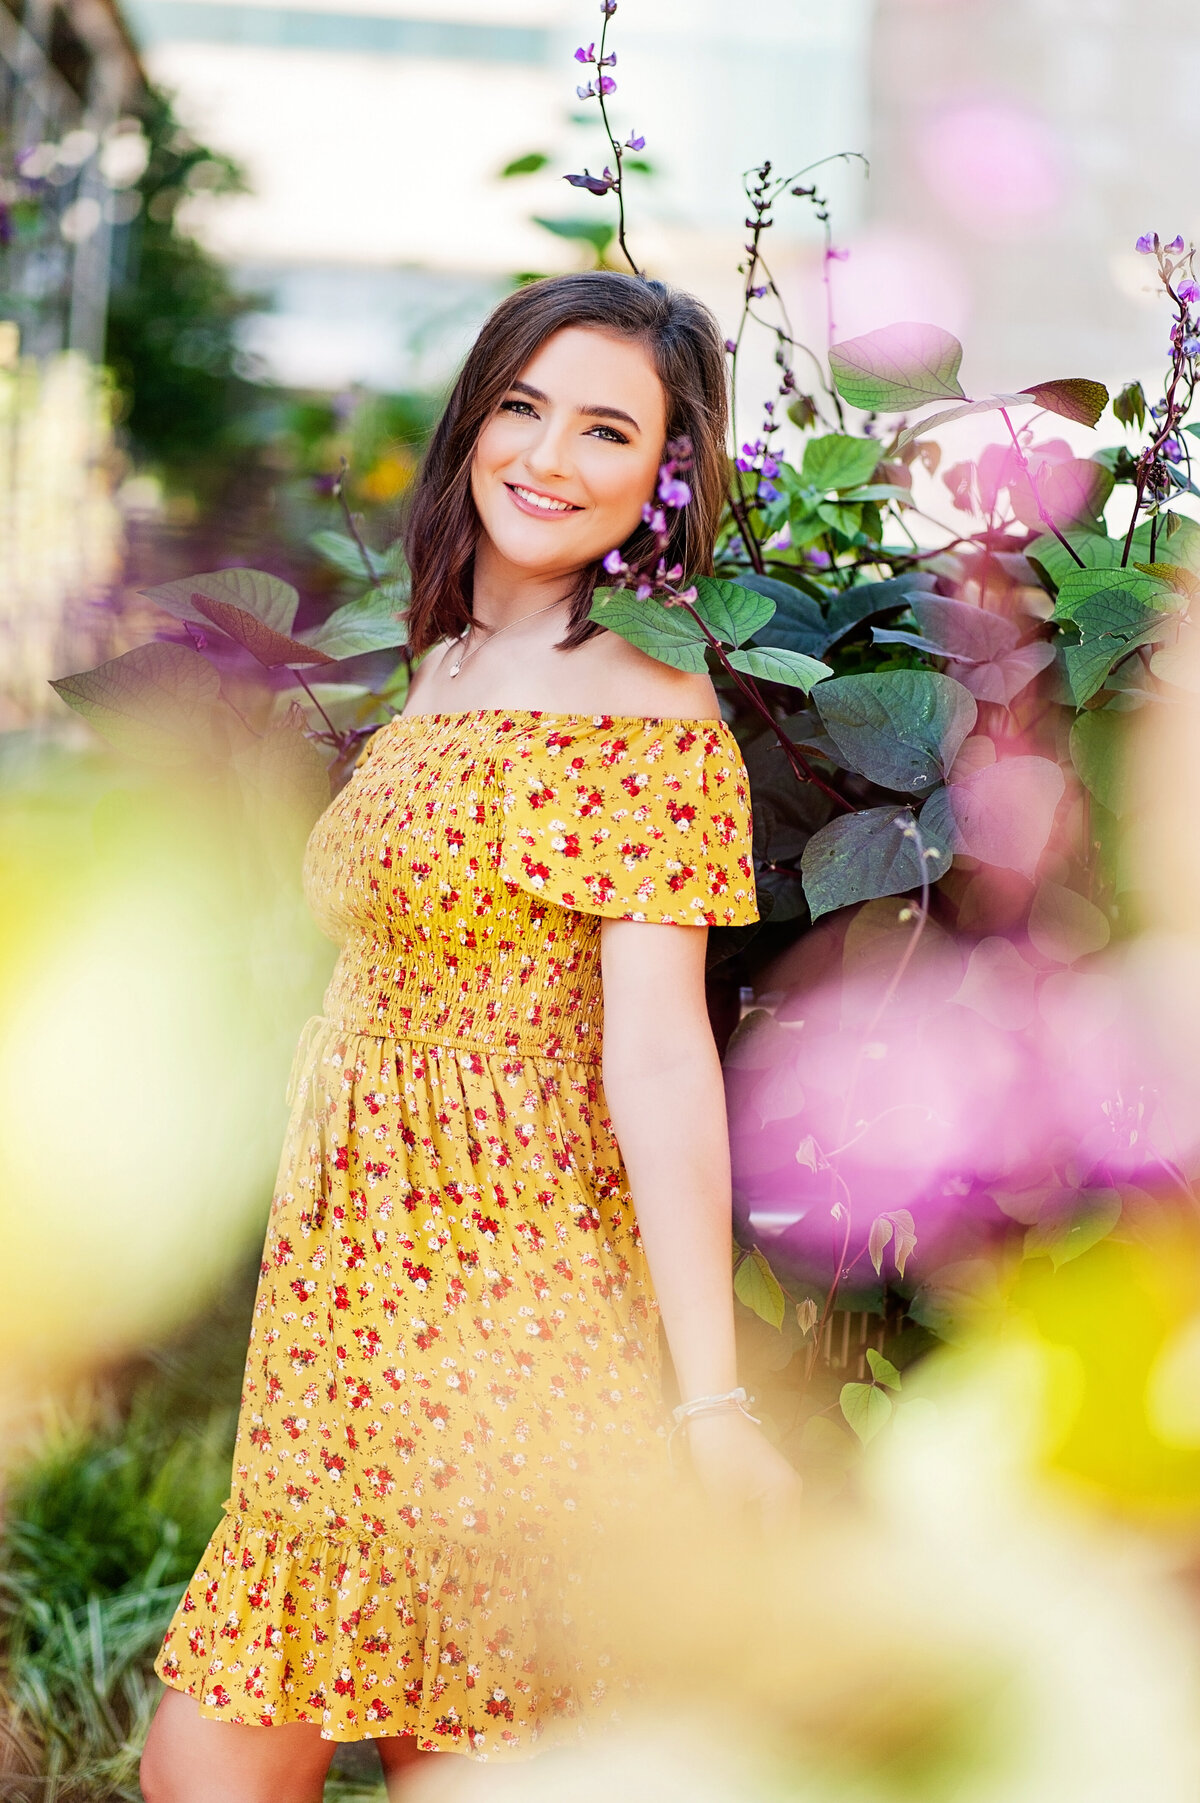 Mechanicsville high school senior girl poses wearing yellow floral dress in front of flowers at VMFA in Richmond, VA.